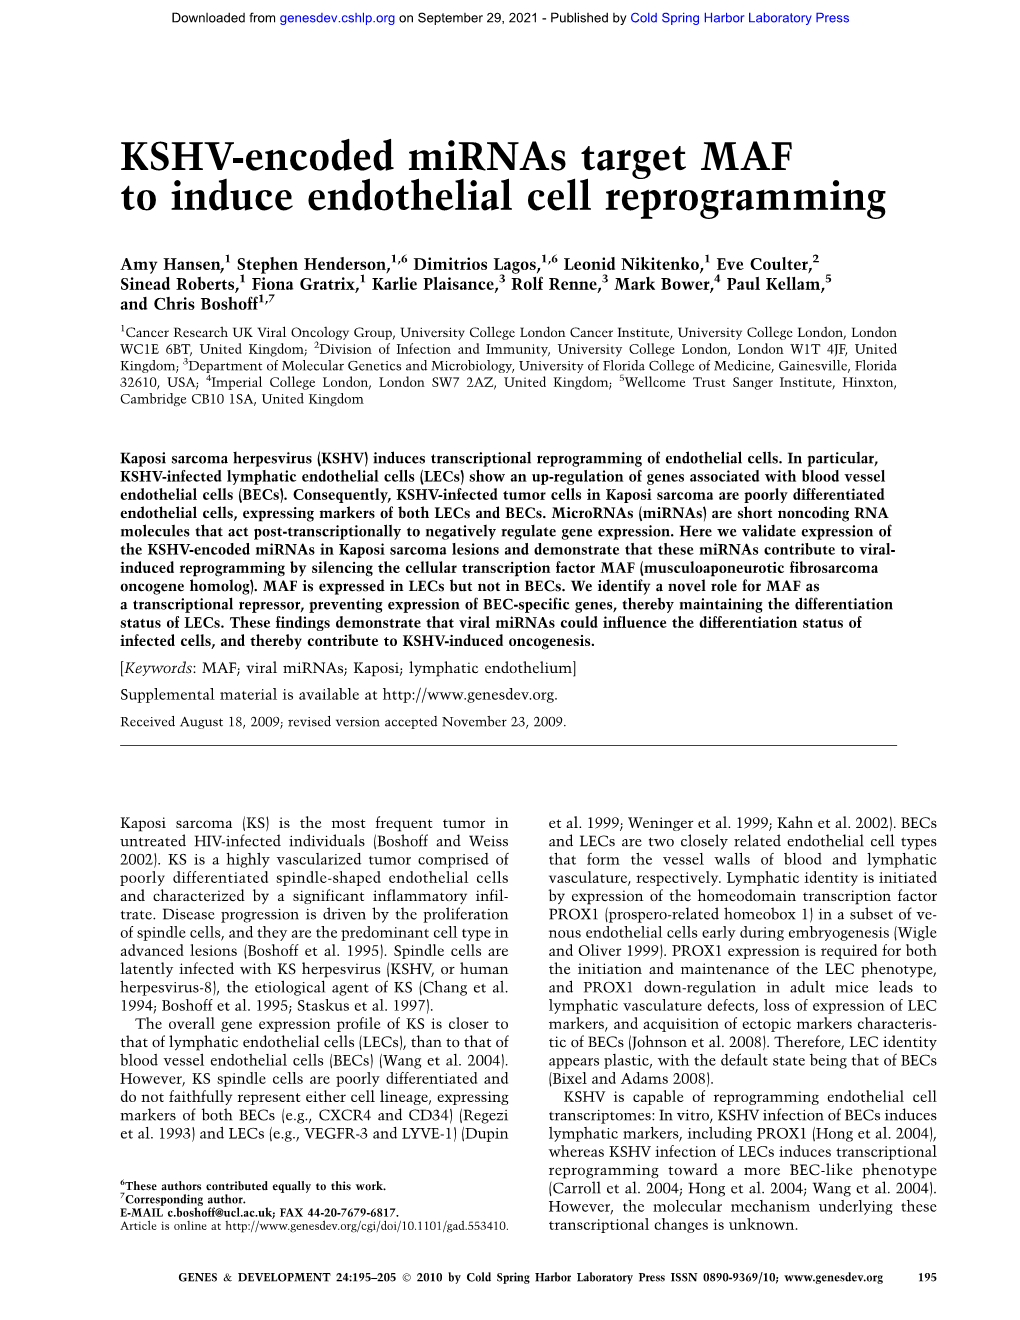 KSHV-Encoded Mirnas Target MAF to Induce Endothelial Cell Reprogramming